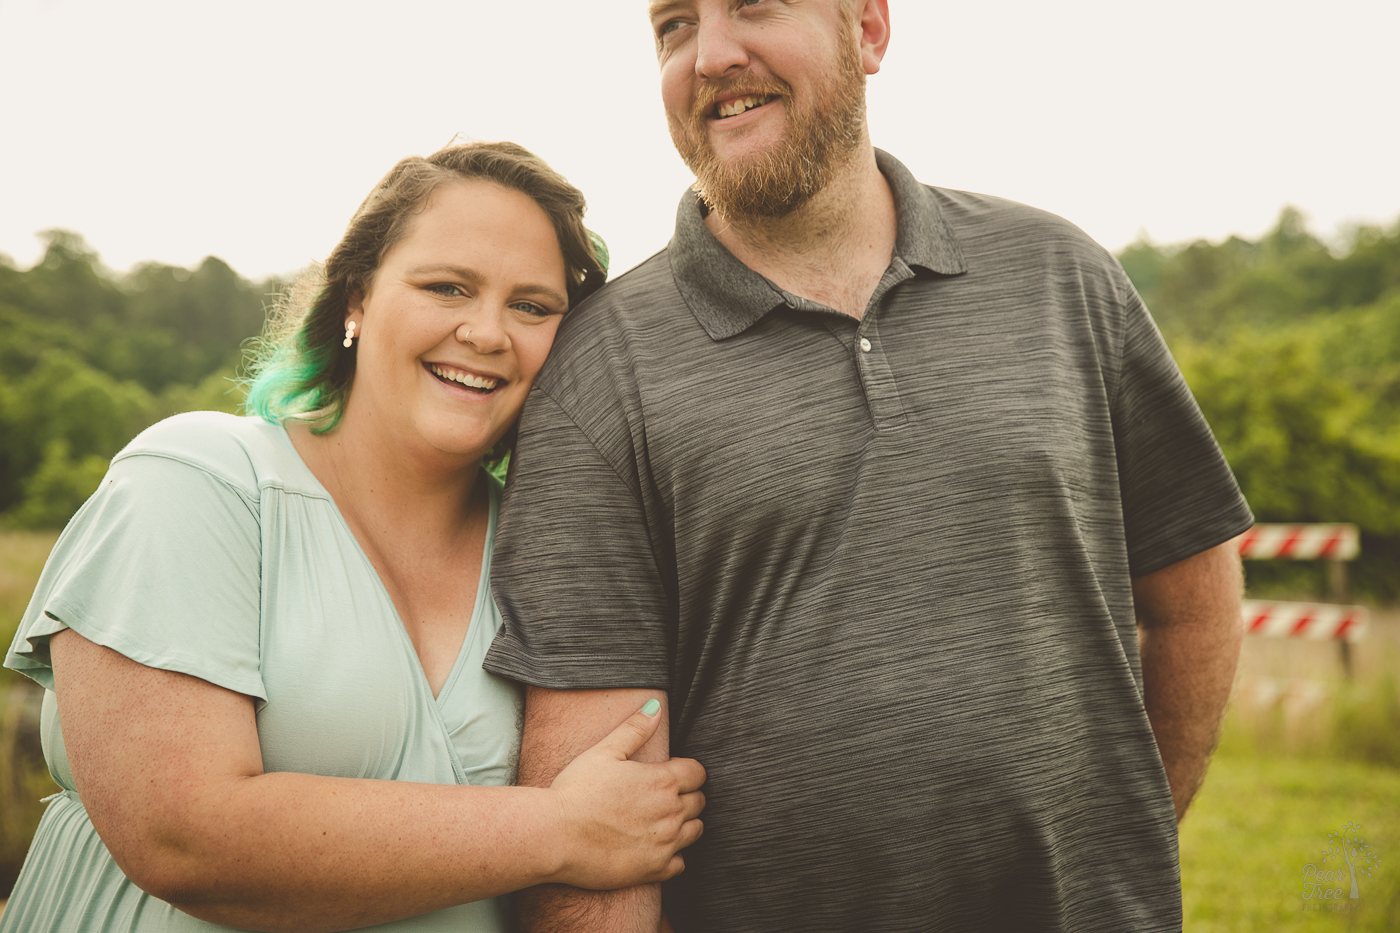 Laughing woman in a green dress and teal hair holding her husband's arm while he smiles